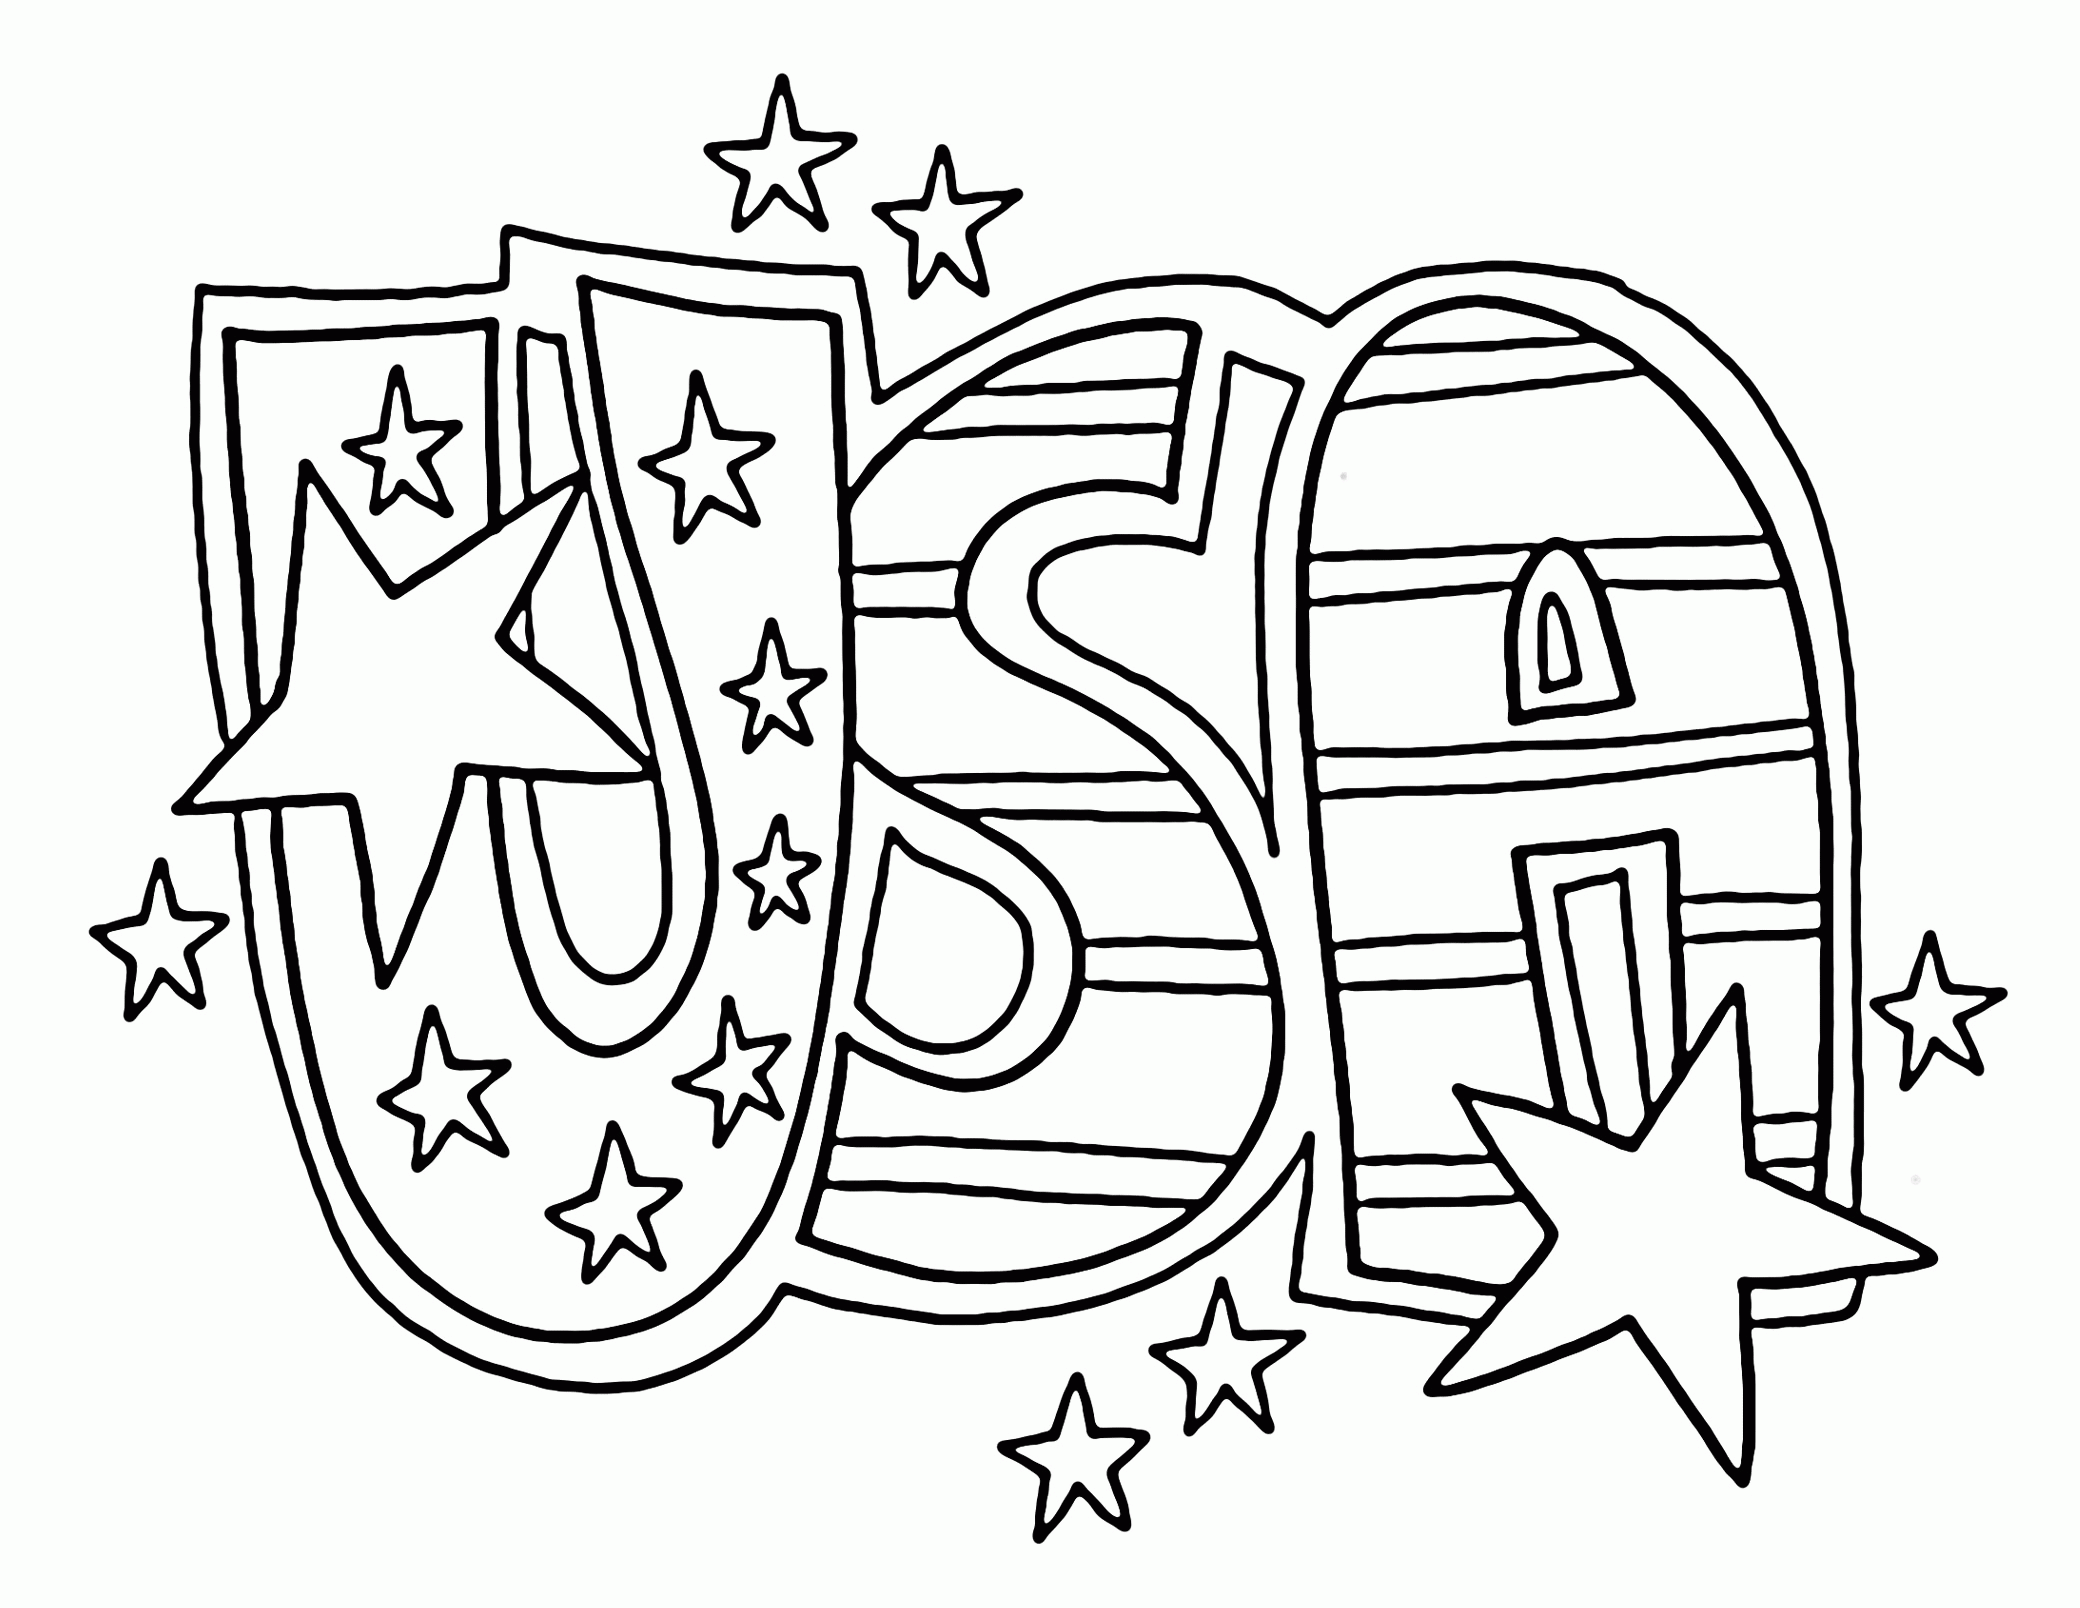 Usa Coloring Page Coloring Home